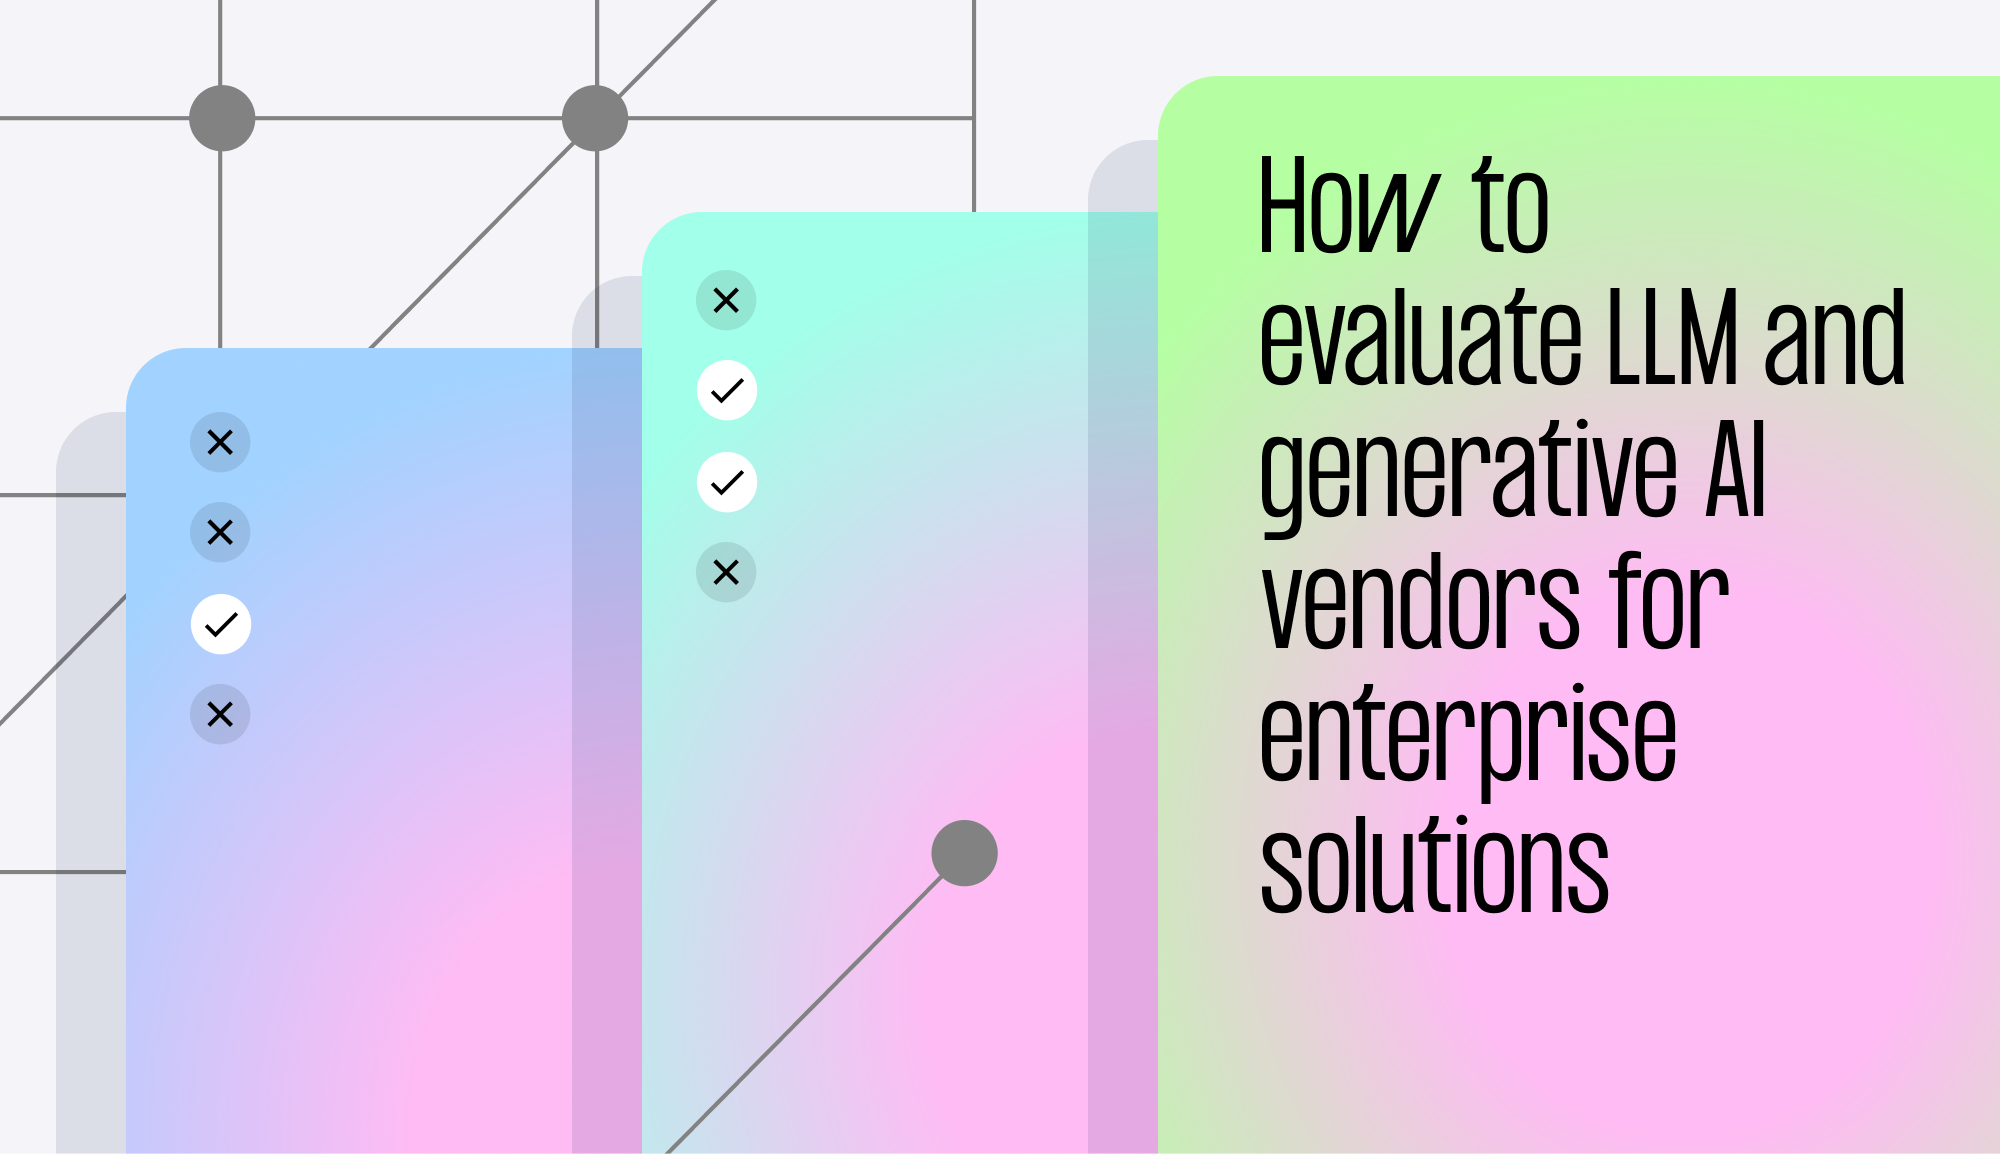 How to evaluate LLM and generative AI vendors for enterprise solutions